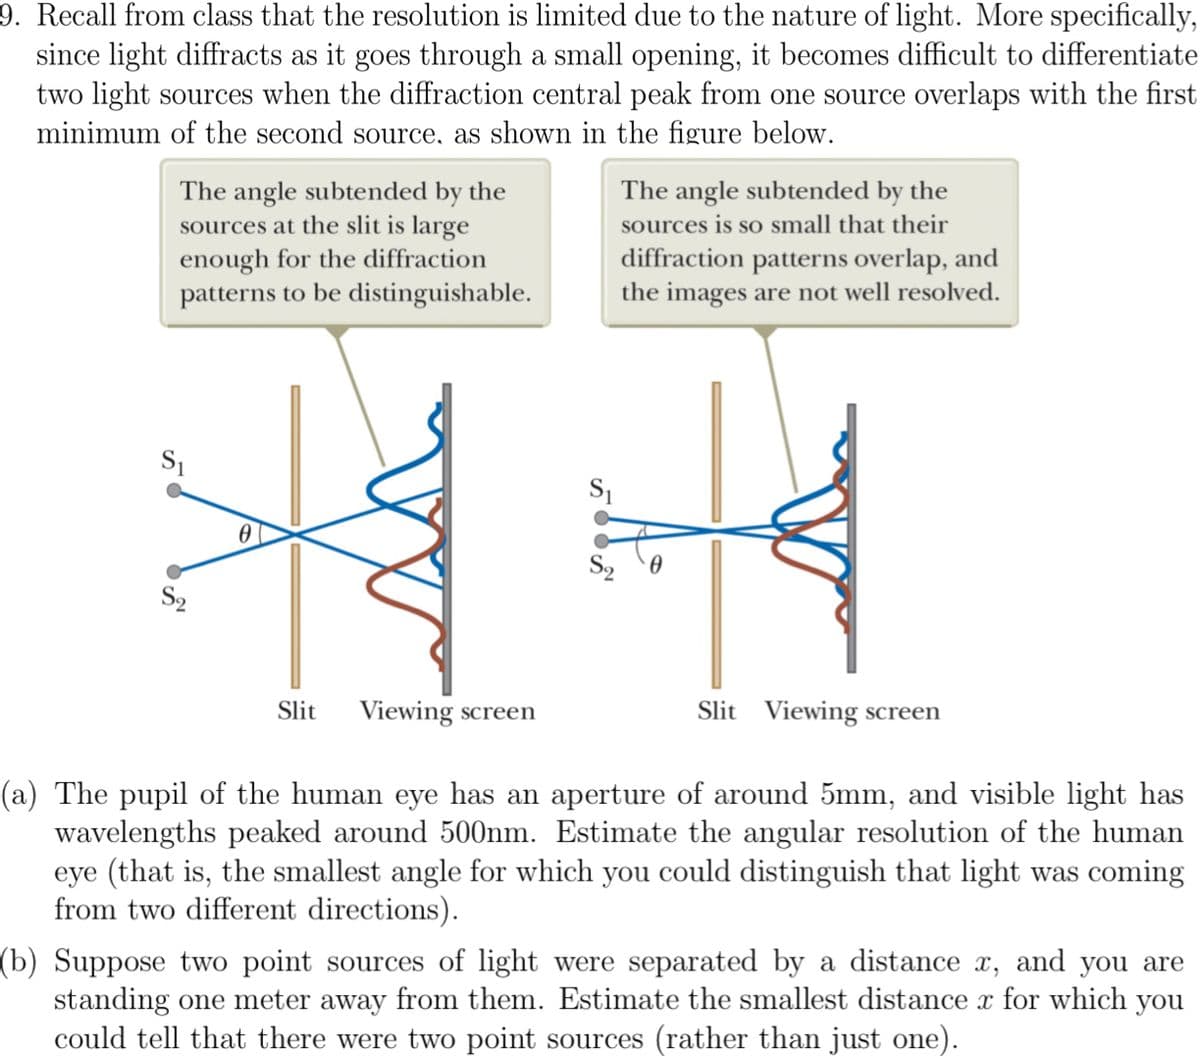 9. Recall from class that the resolution is limited due to the nature of light. More specifically,
since light diffracts as it goes through a small opening, it becomes difficult to differentiate
two light sources when the diffraction central peak from one source overlaps with the first
minimum of the second source, as shown in the figure below.
The angle subtended by the
sources at the slit is large
enough for the diffraction
patterns to be distinguishable.
S₁
4
0
S2
Slit
Viewing screen
S₁
The angle subtended by the
sources is so small that their
diffraction patterns overlap, and
the images are not well resolved.
Slit Viewing screen
(a) The pupil of the human eye has an aperture of around 5mm, and visible light has
wavelengths peaked around 500nm. Estimate the angular resolution of the human
eye (that is, the smallest angle for which you could distinguish that light was coming
from two different directions).
(b) Suppose two point sources of light were separated by a distance x, and you are
standing one meter away from them. Estimate the smallest distance x for which you
could tell that there were two point sources (rather than just one).